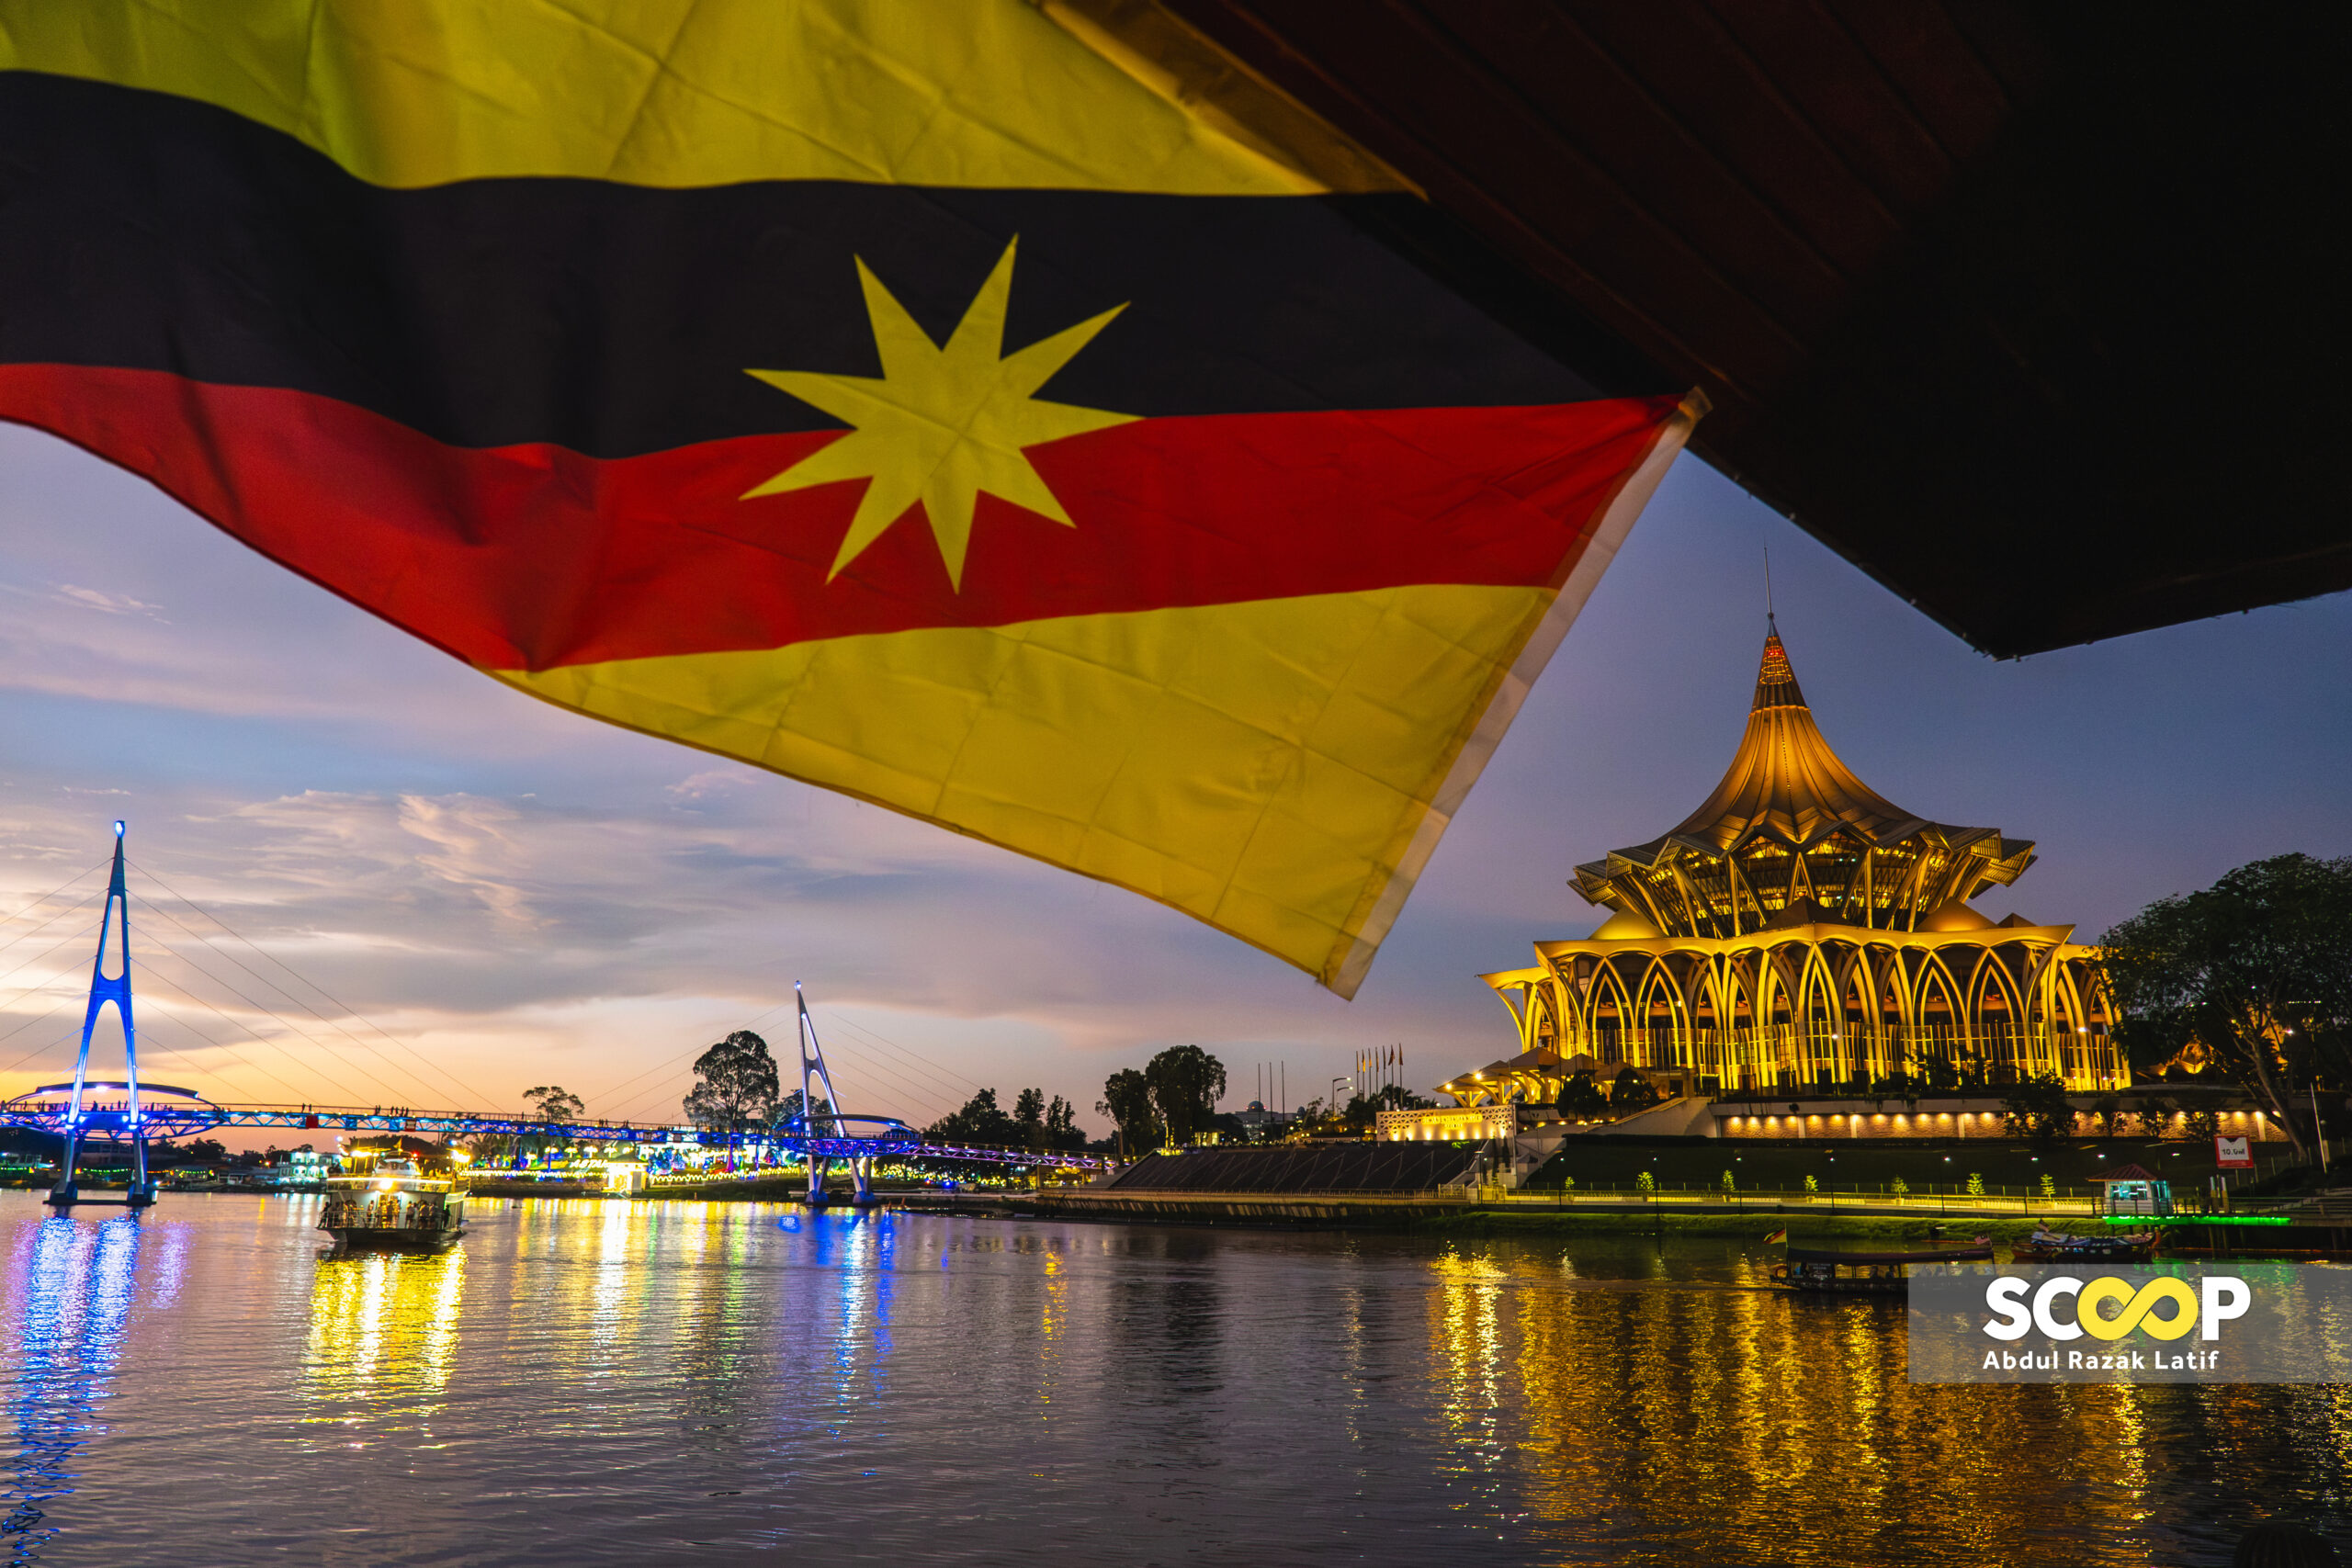 Premier’s office: no state legislative special meeting to discuss new Sarawak governor